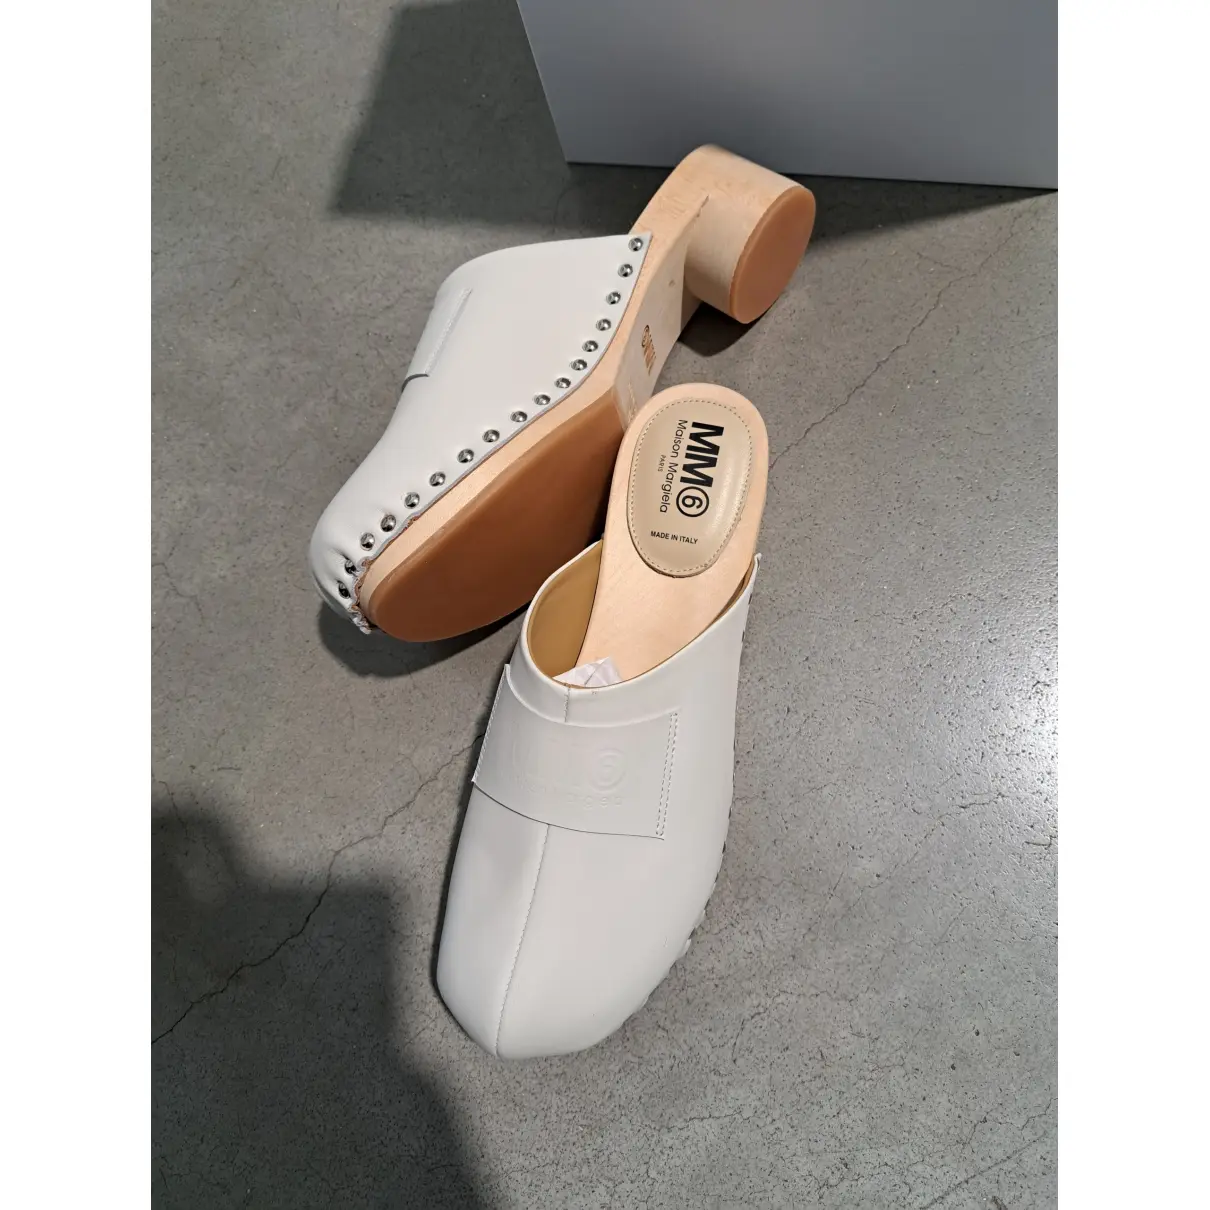 Buy MM6 Leather mules & clogs online